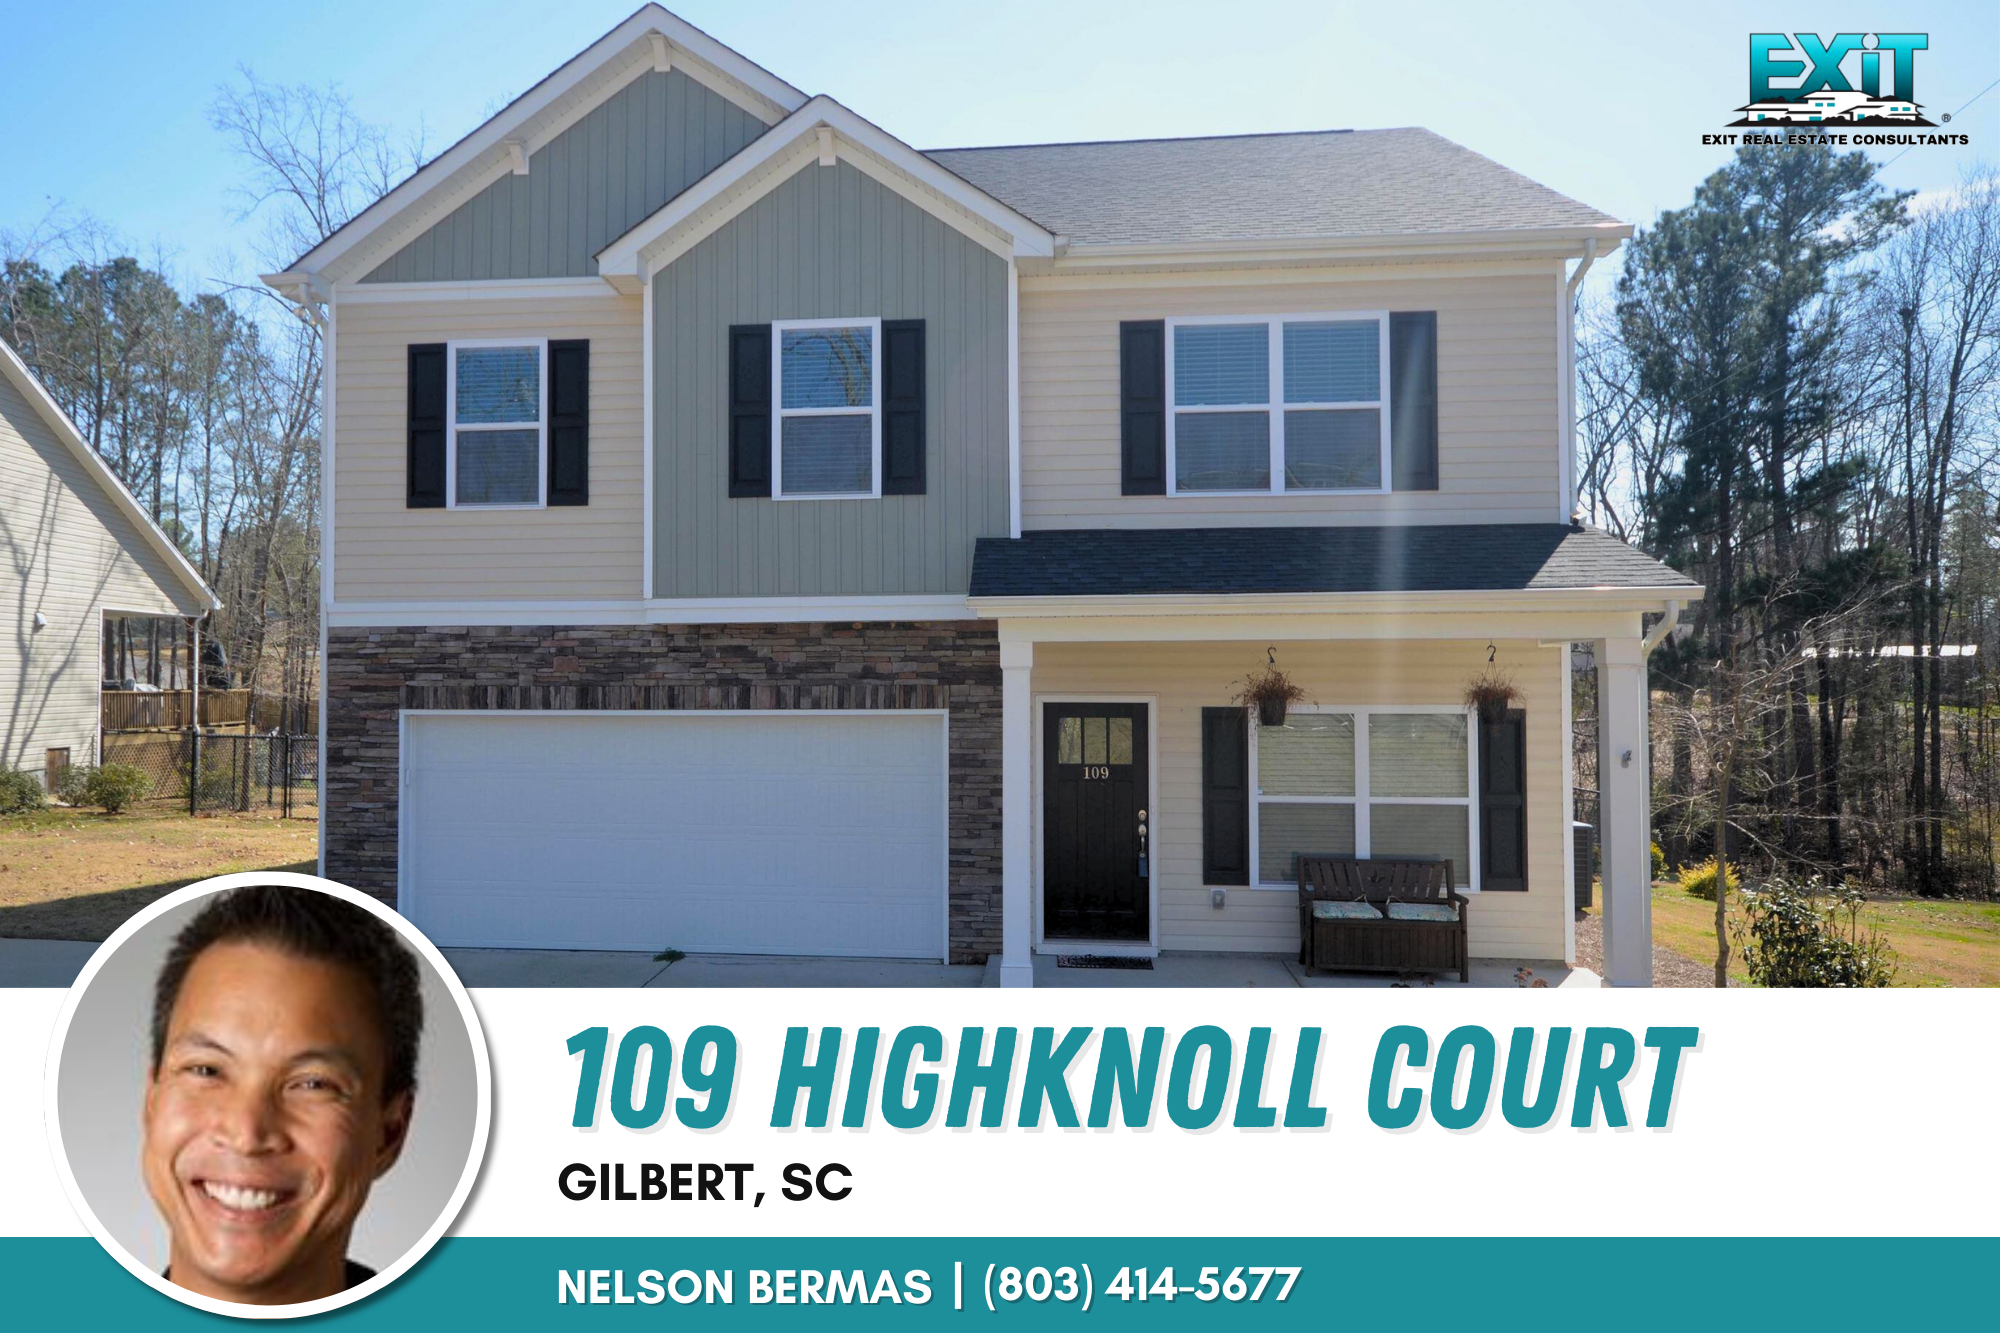 Just listed in High Knoll - Gilbert